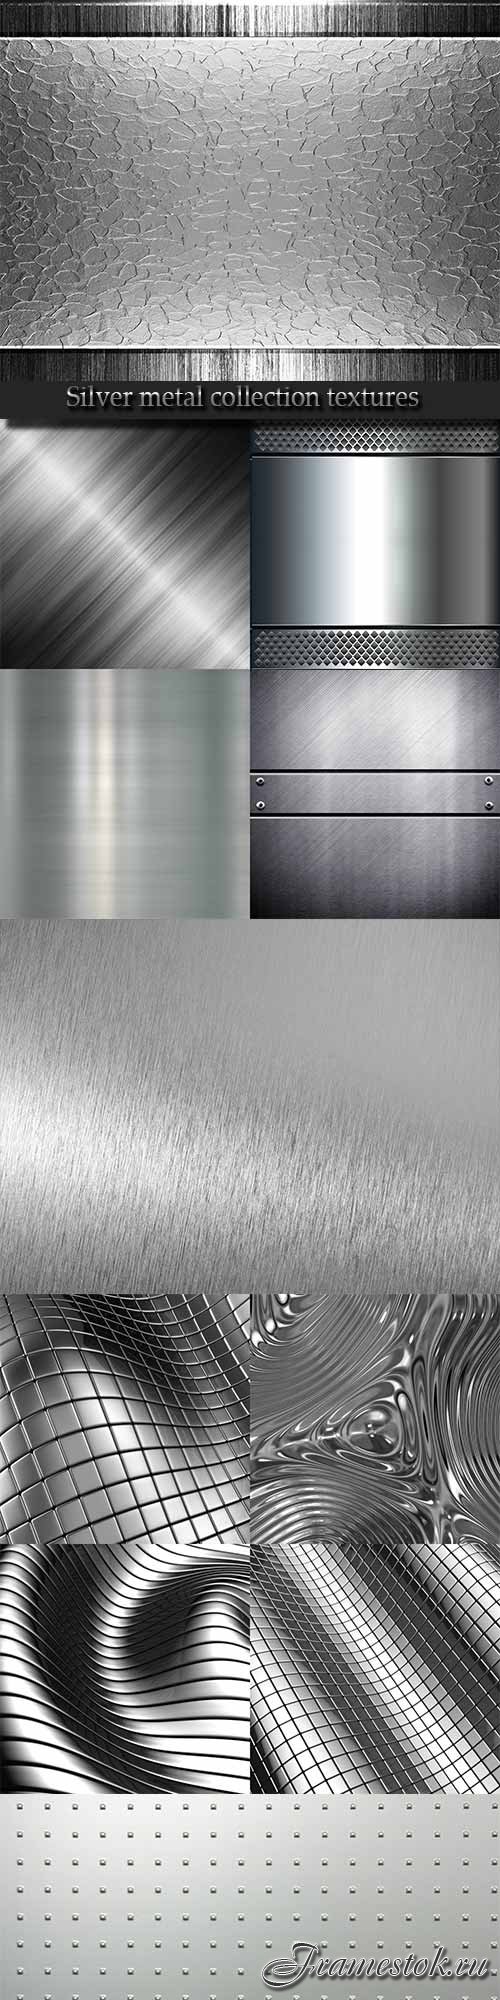 Silver metal collection textures